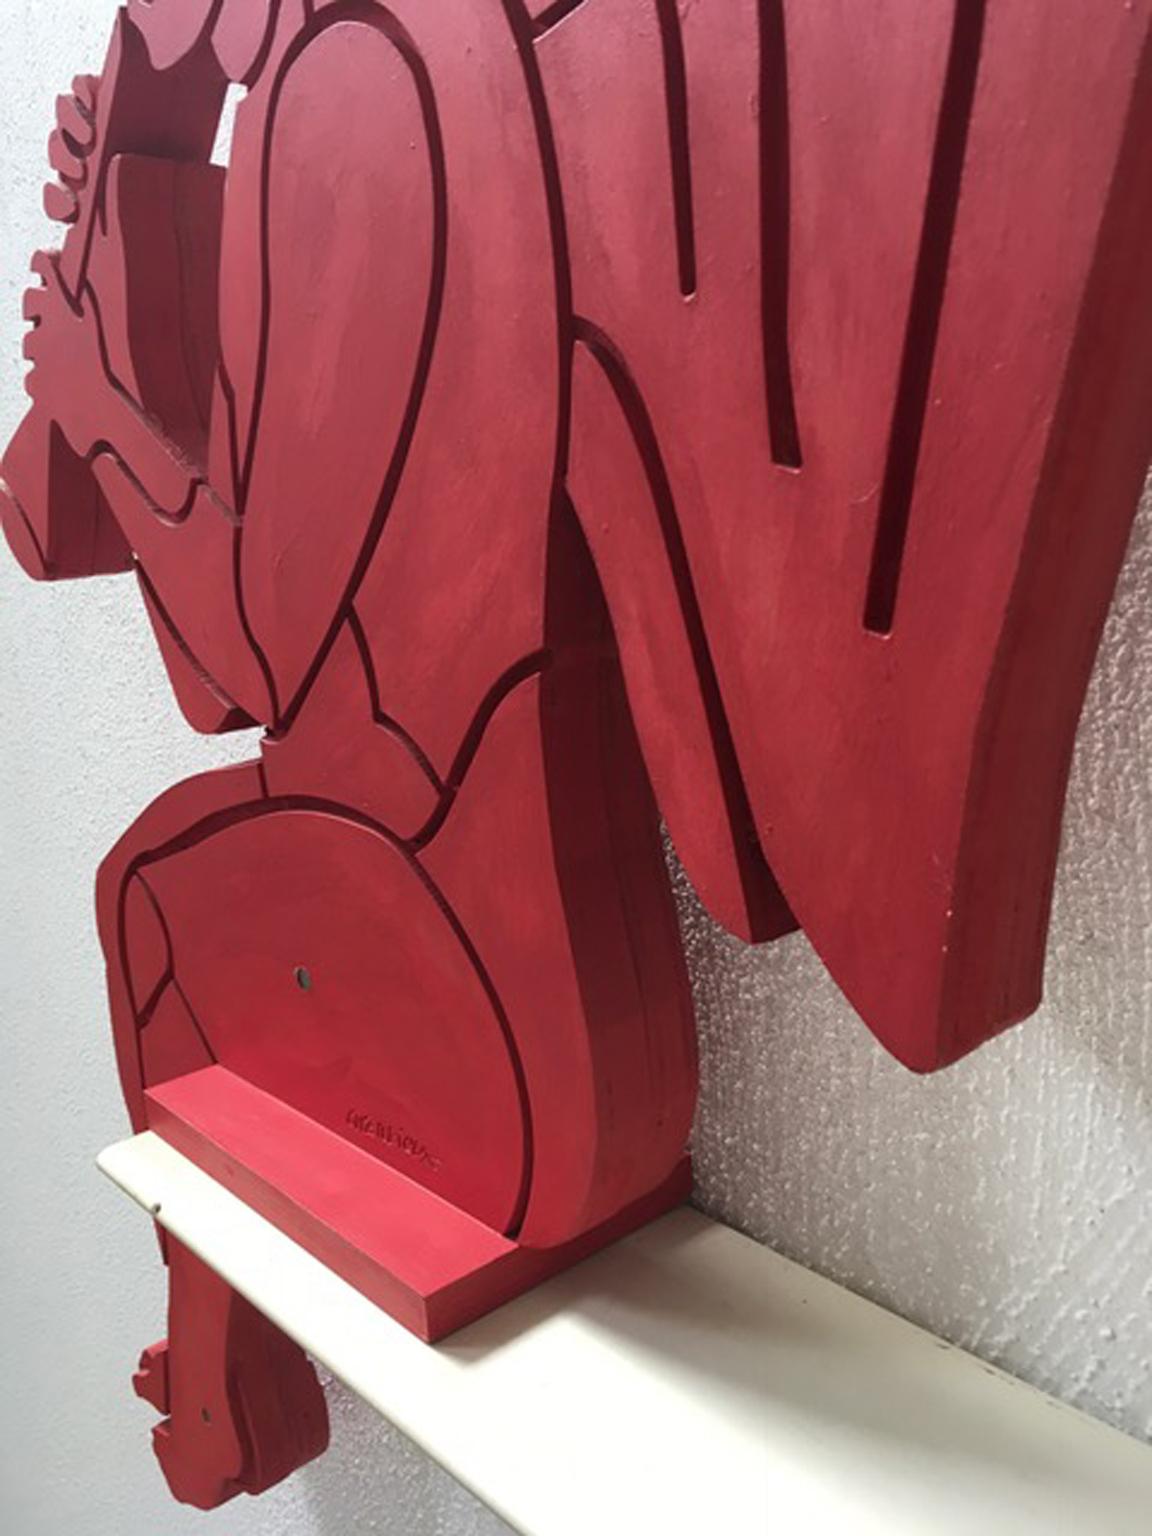 Cherubino Red Angel Lacquered Playwood Italy 1985 Bruno Chersicla Wall Sculpture For Sale 7